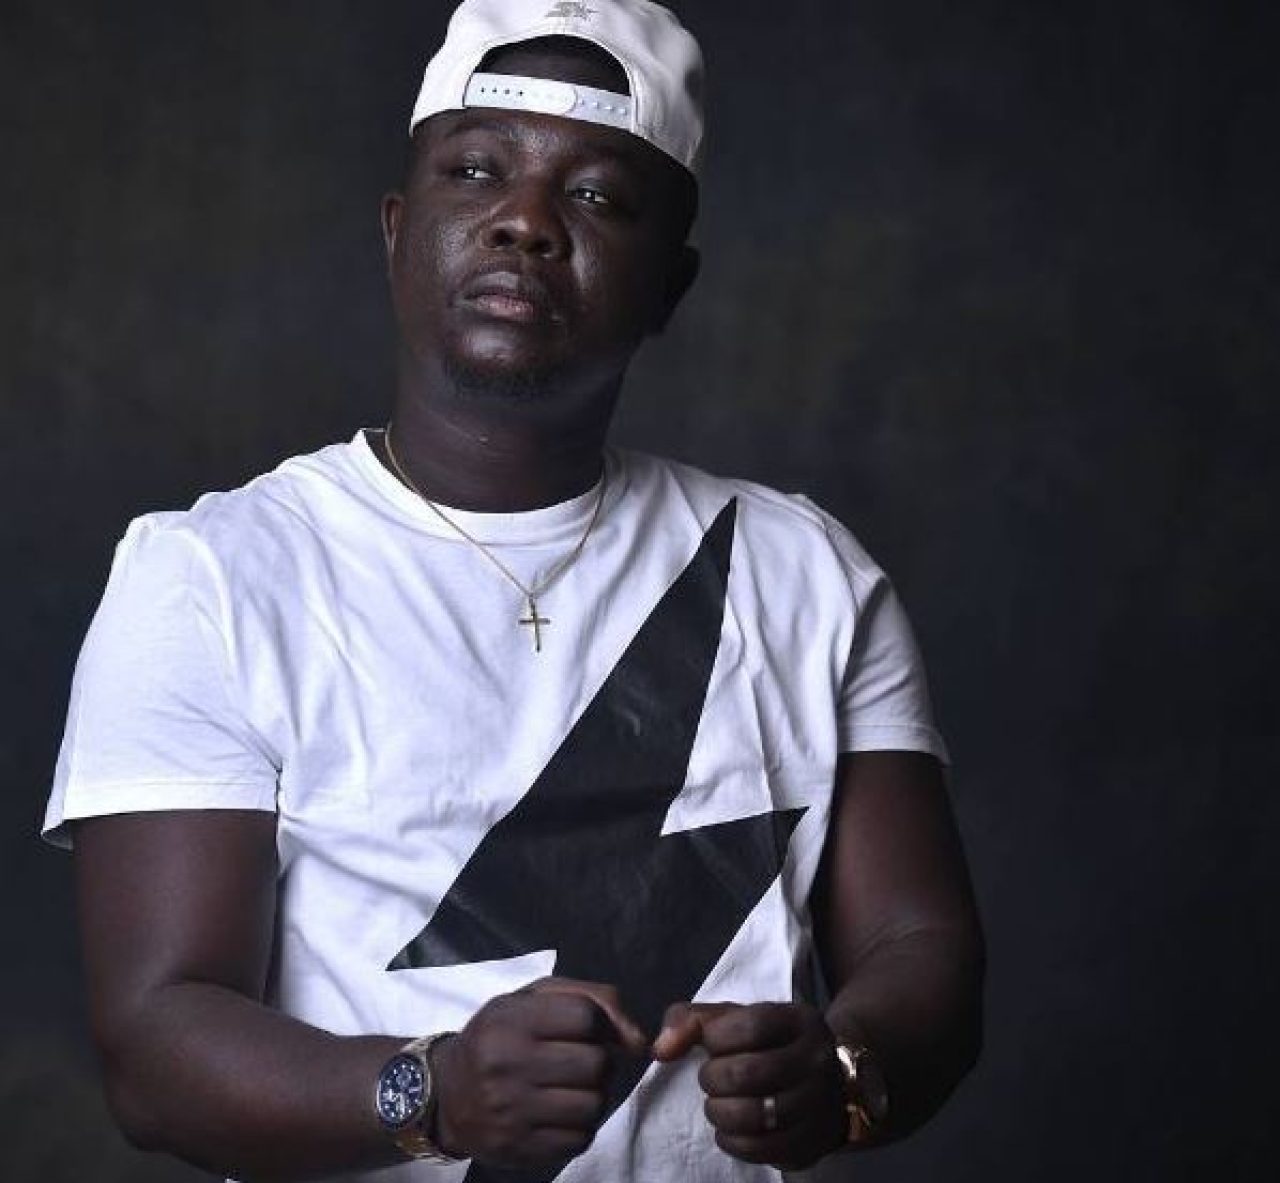 Igbos propagate hate and have no respect for hierarchy or authority - Comedian Seyi Law reacts to Pere's 'Hate on Igbo's claim. AdvertAfrica News on afronewswire.com: Amplifying Africa's Voice | afronewswire.com | Breaking News & Stories